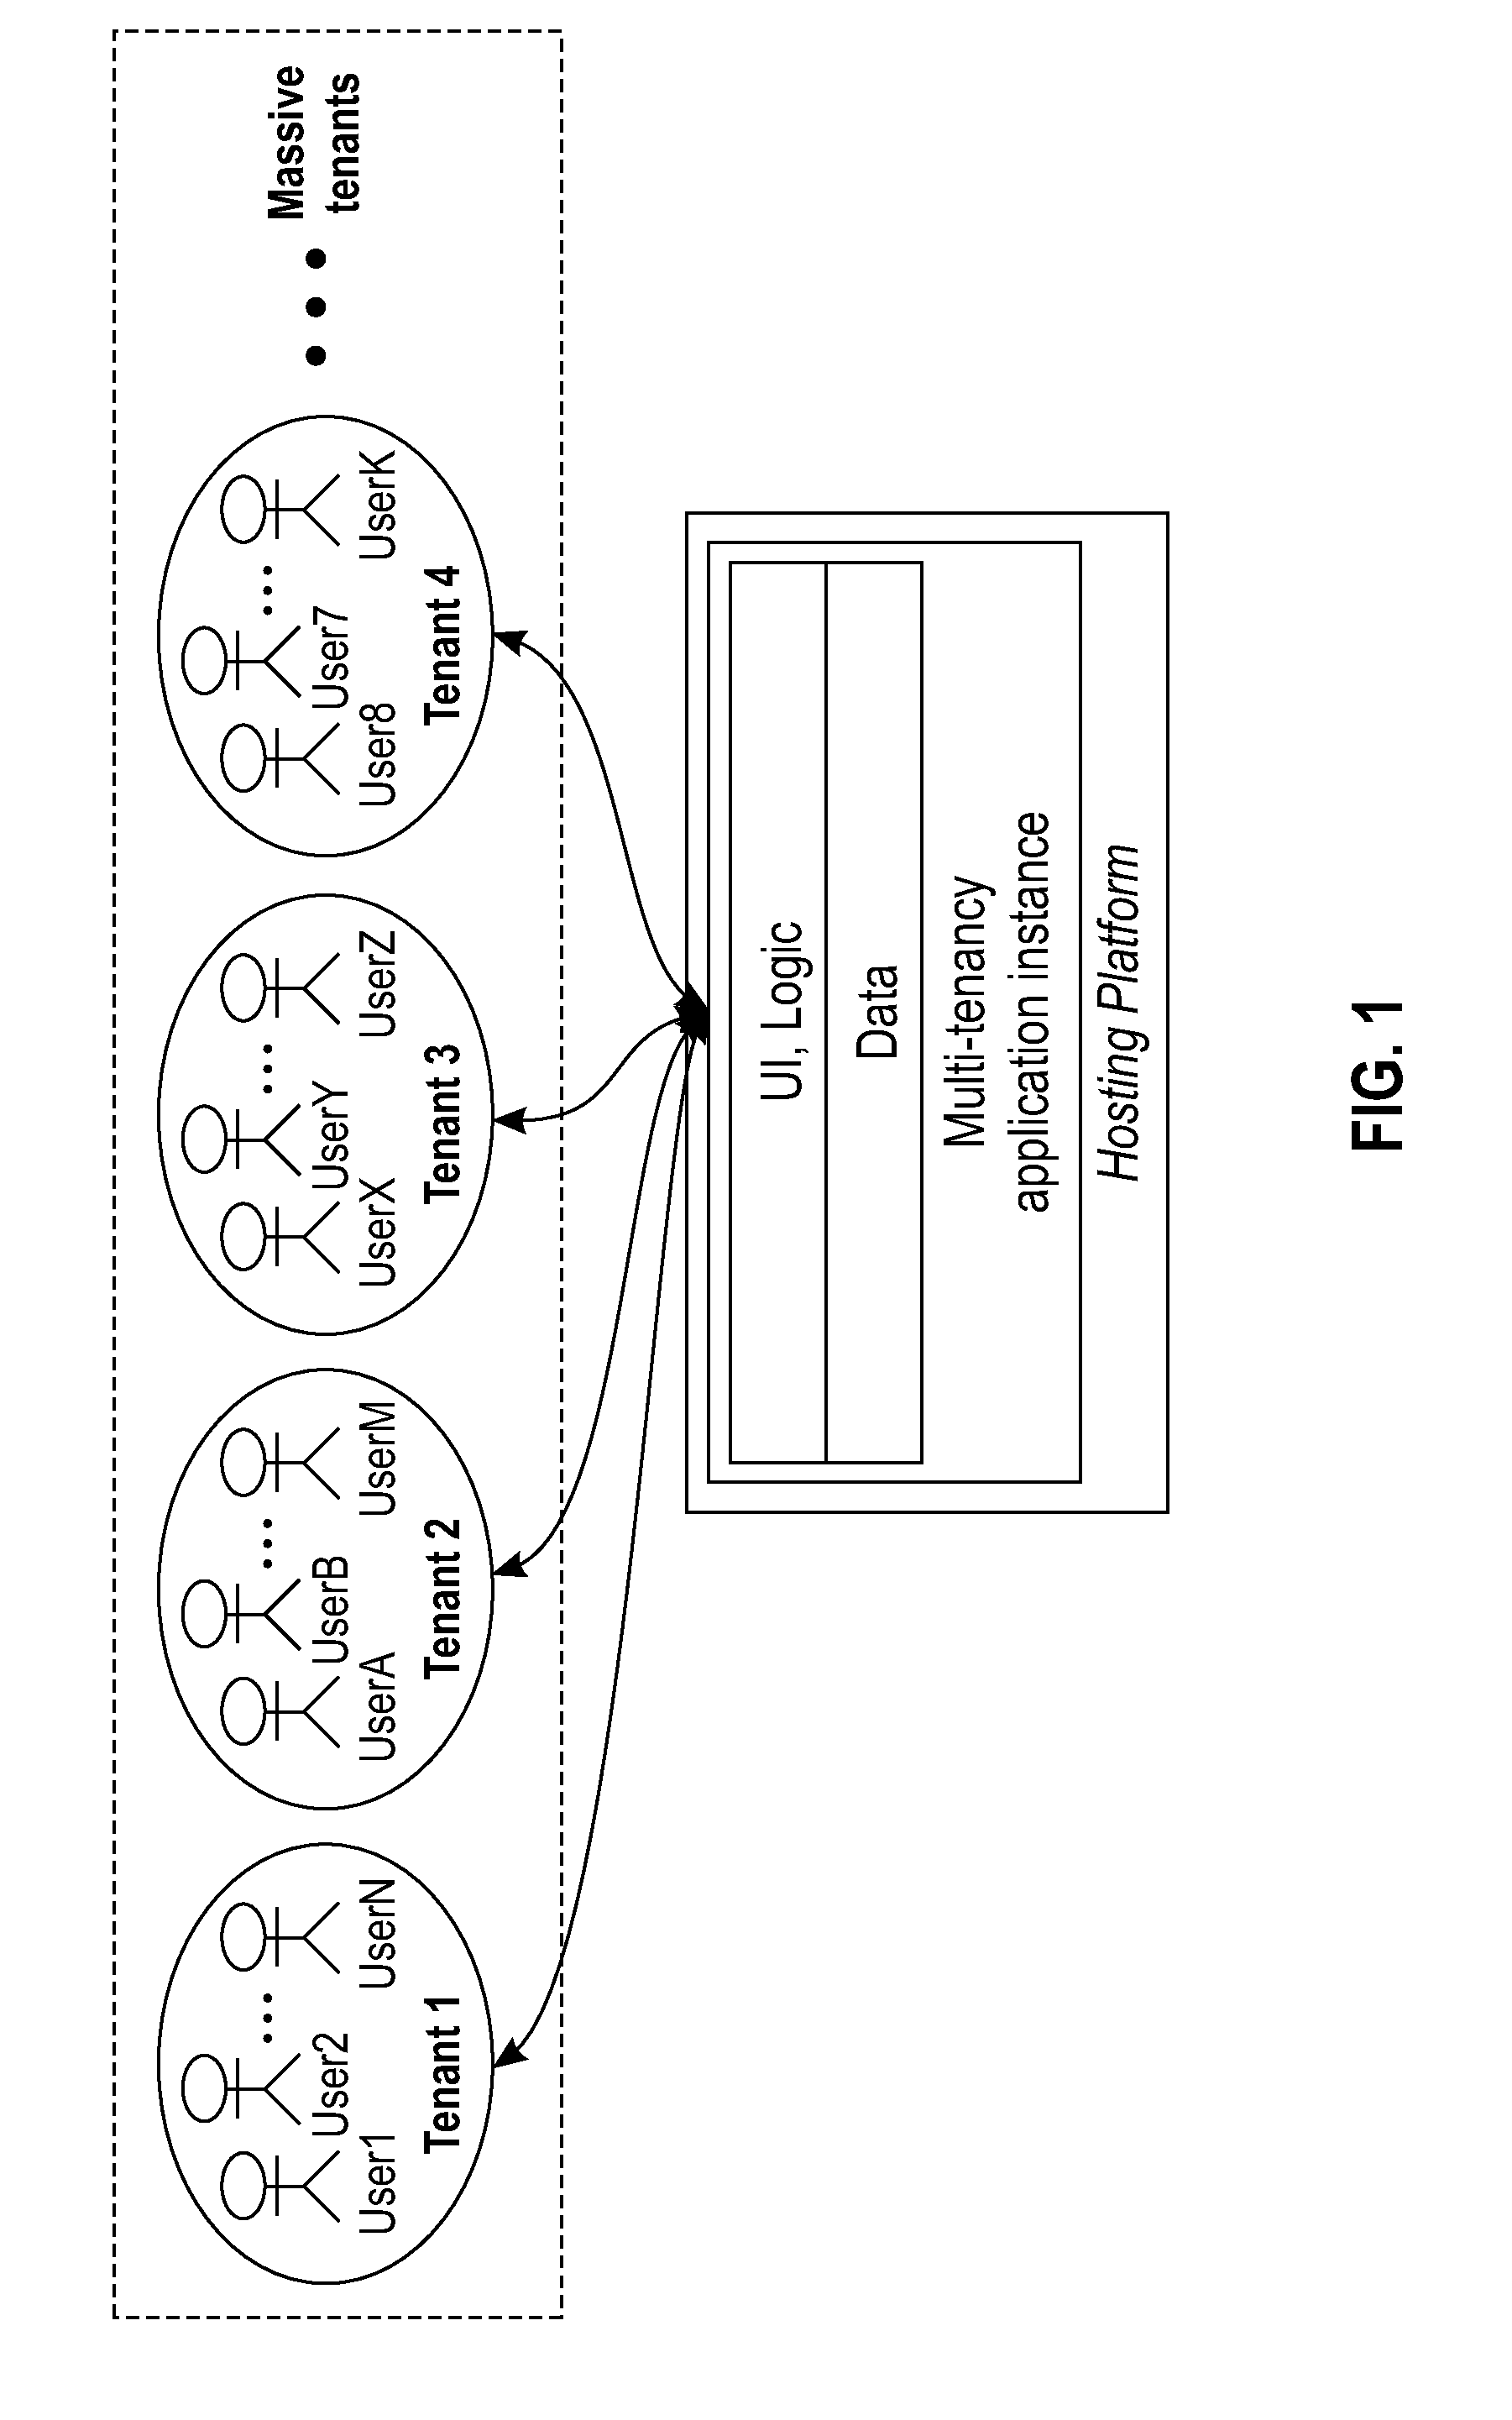 Multi-tenancy data storage and access method and apparatus